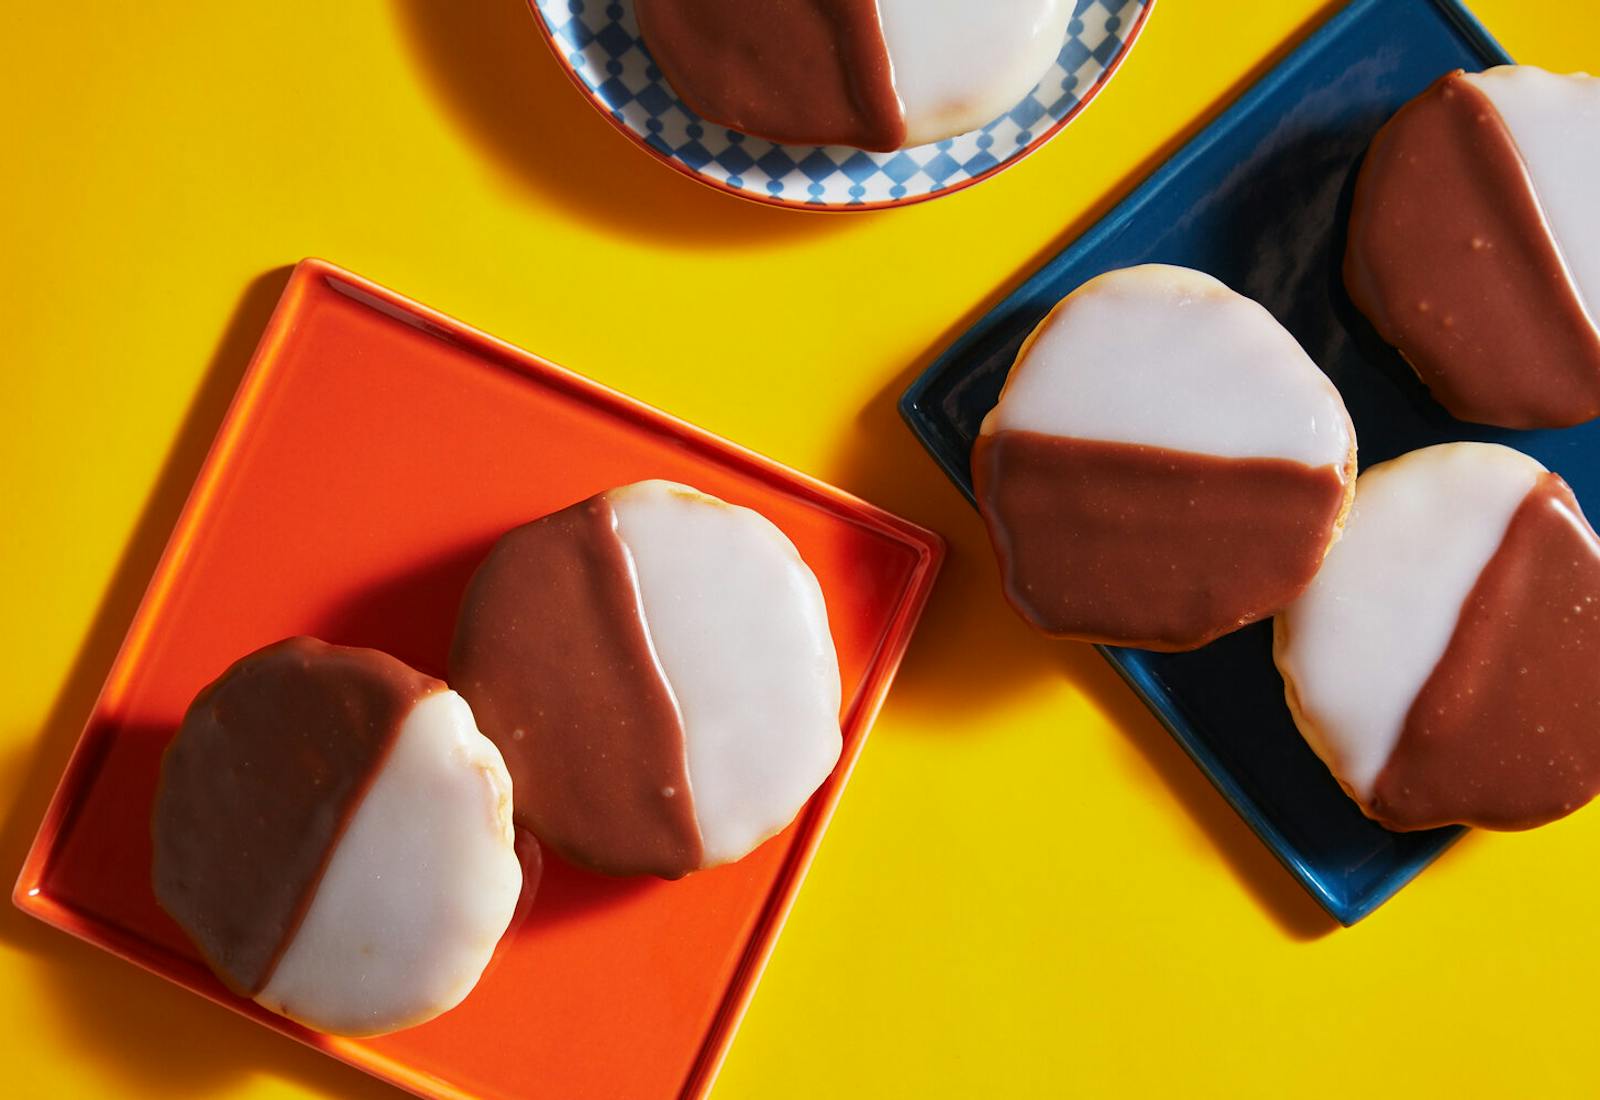 Black and white cookies on various colorful plates atop yellow surface.